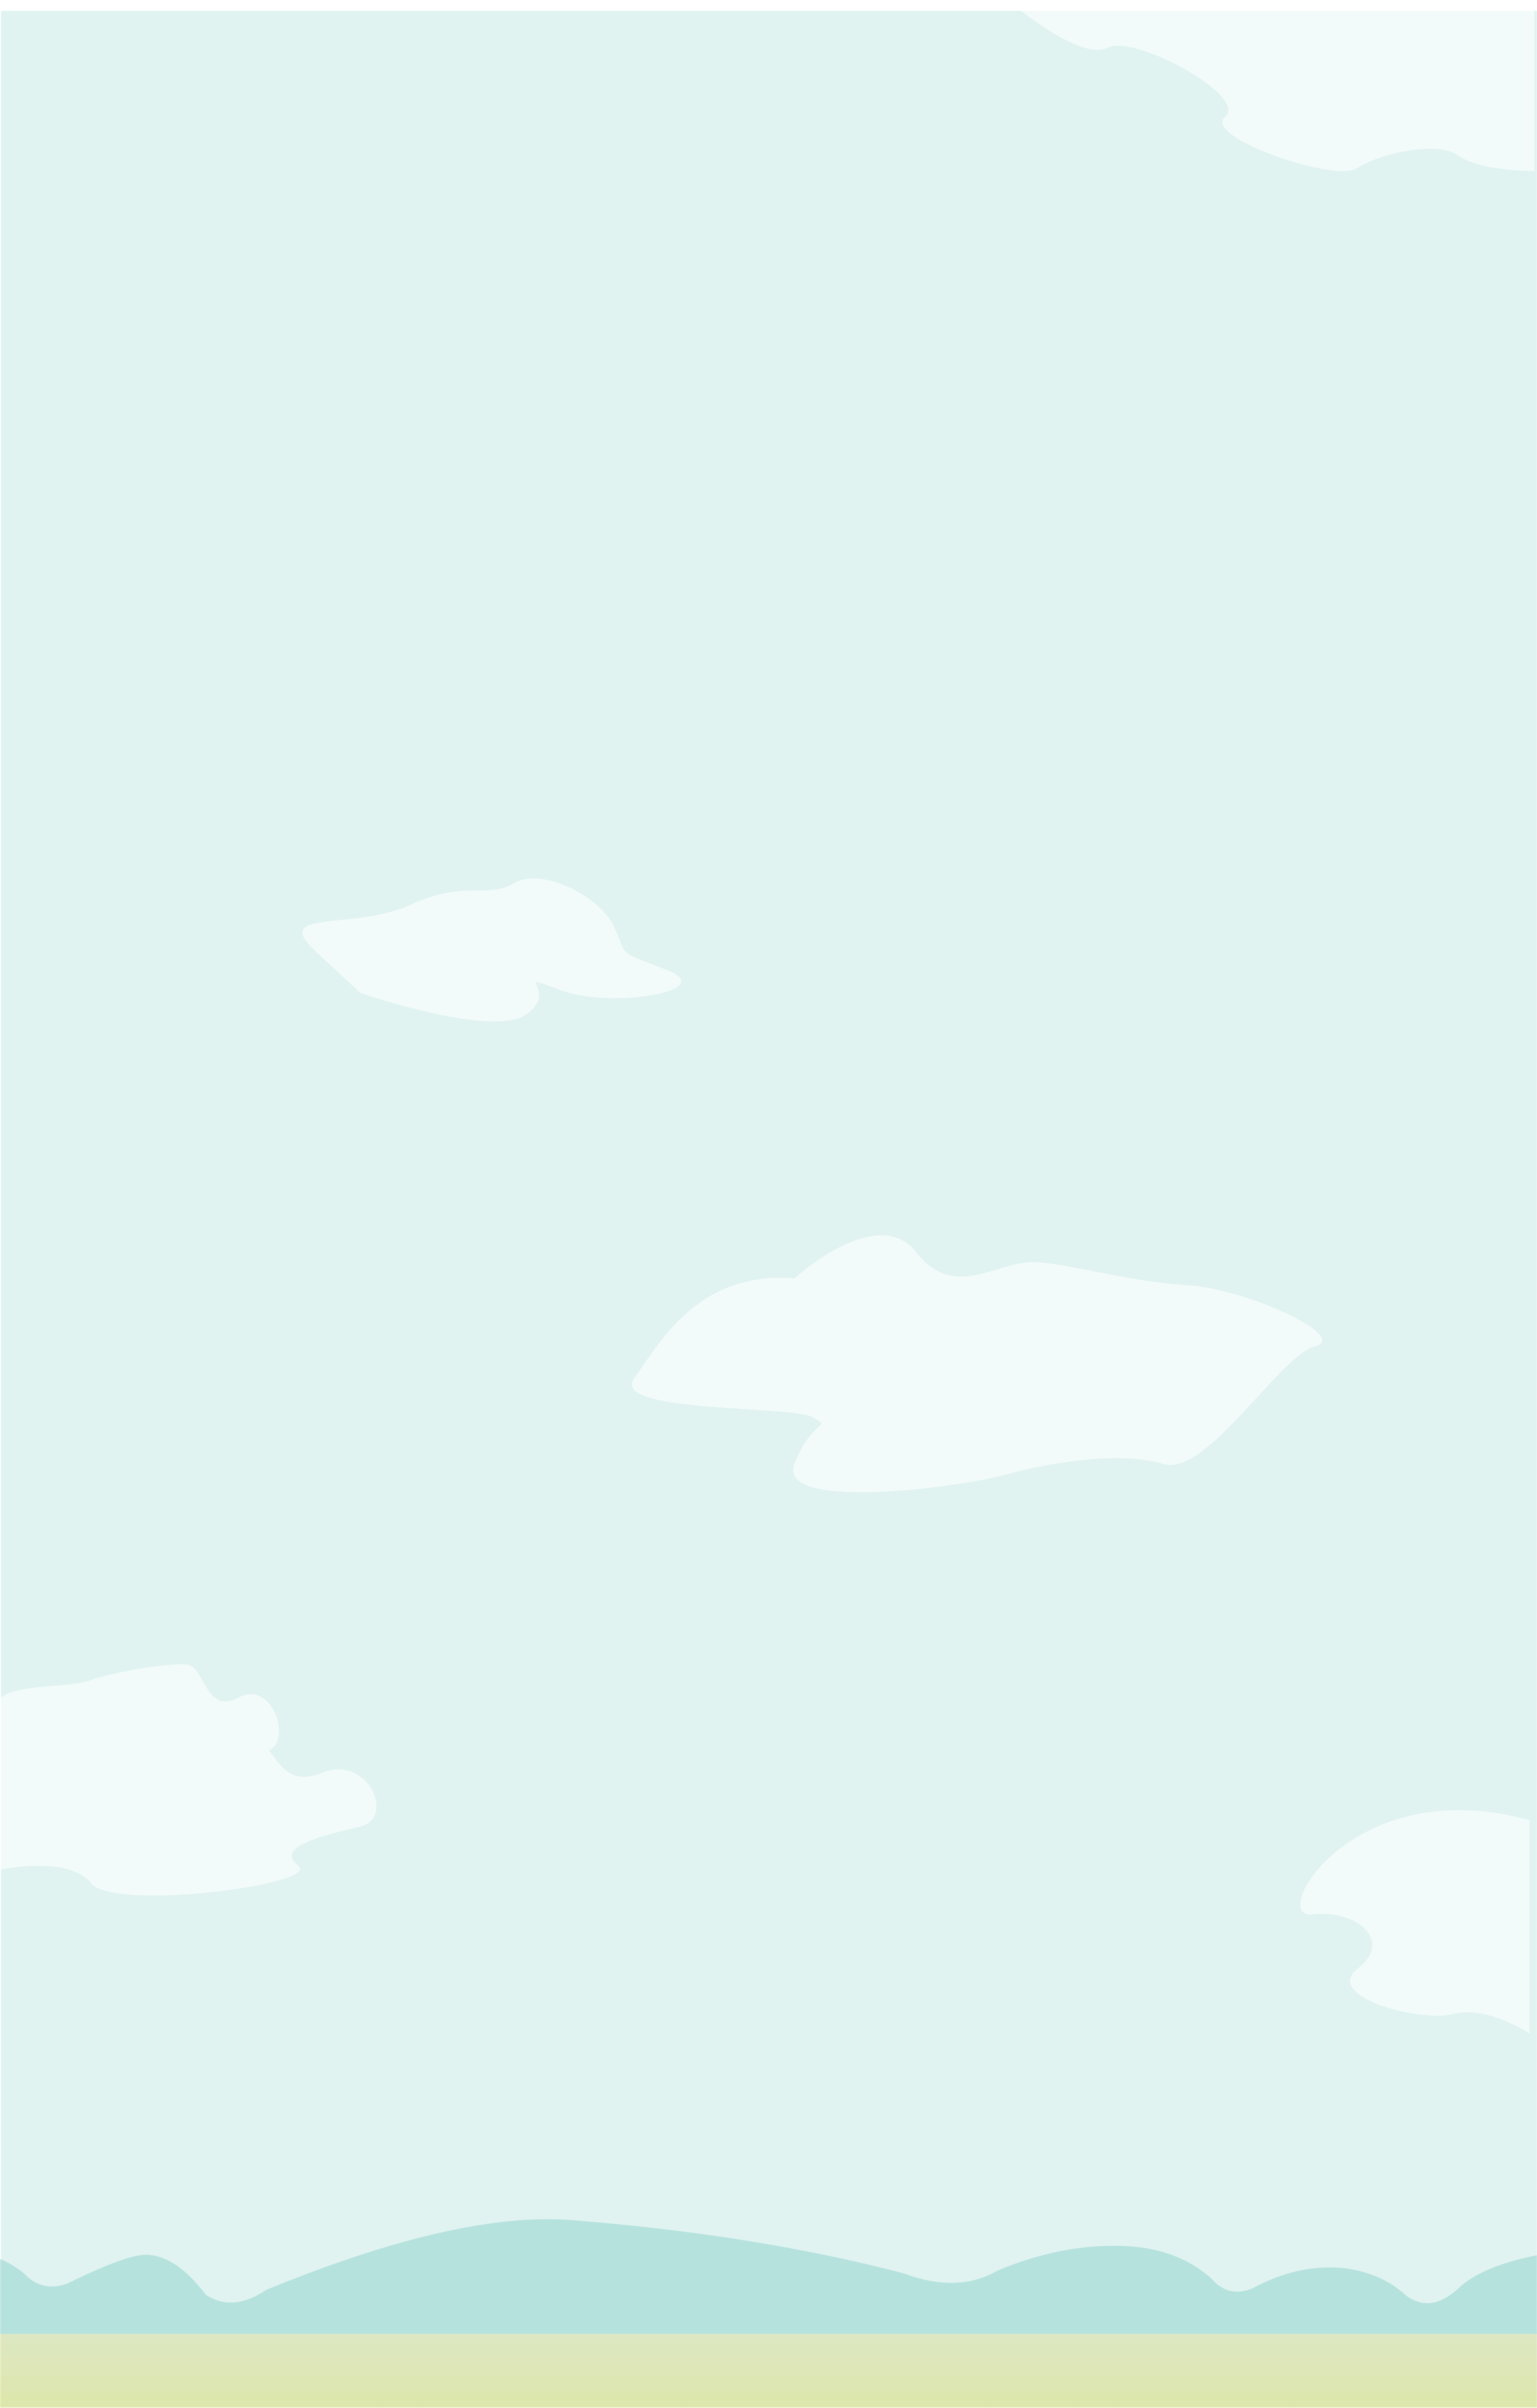 r459-long-background-1-15984563599662.png